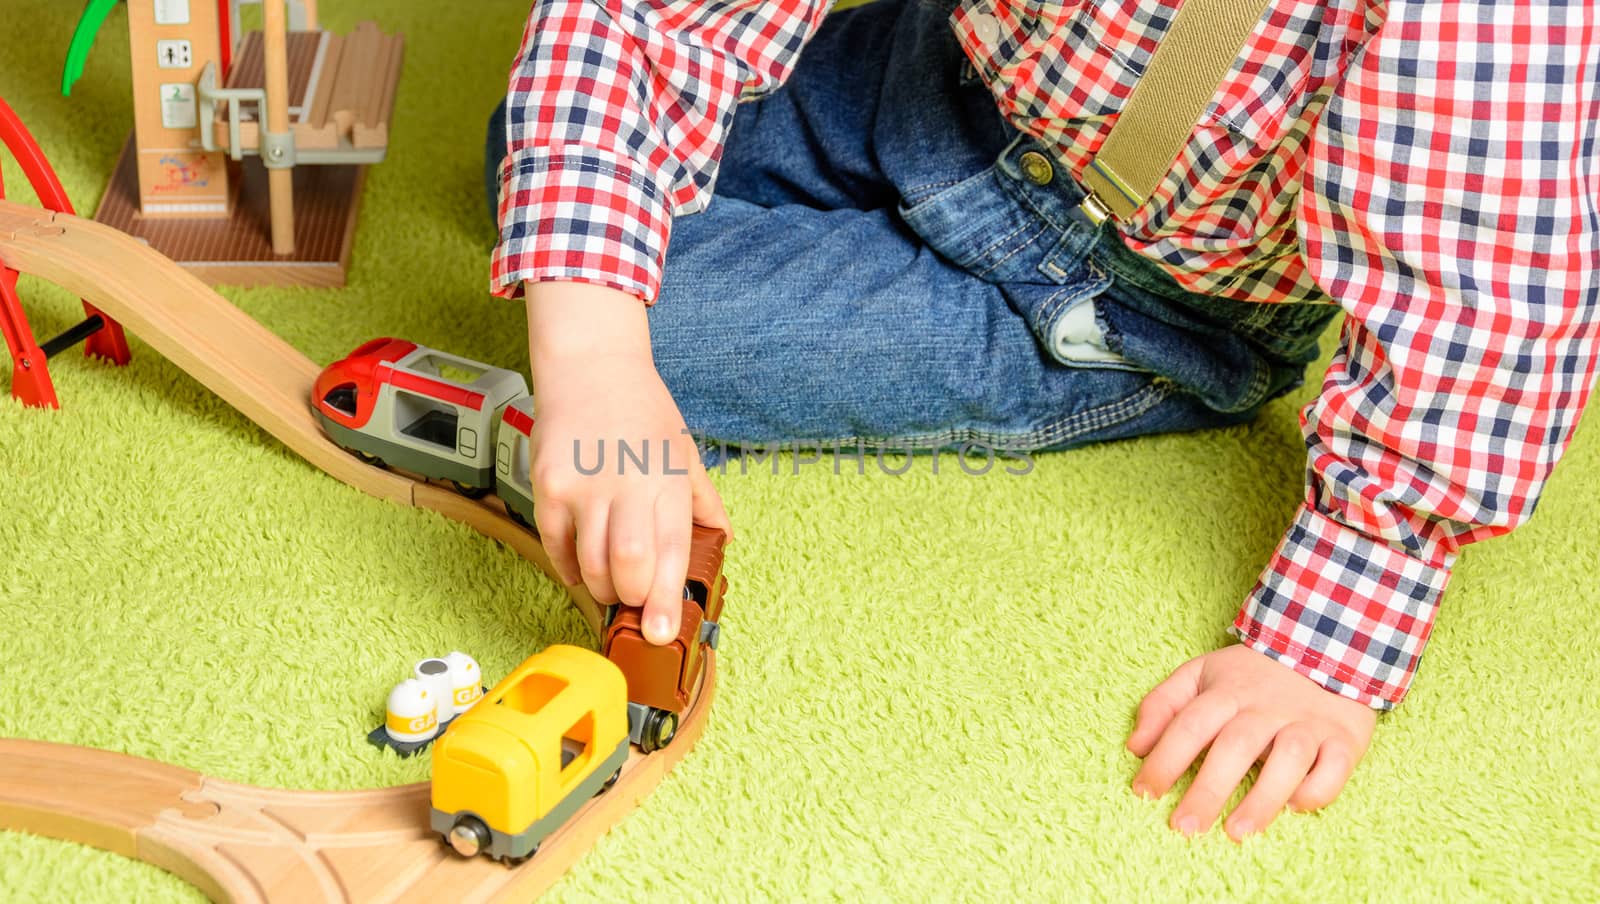 the boy plays the wooden railway sitting on a green carpet